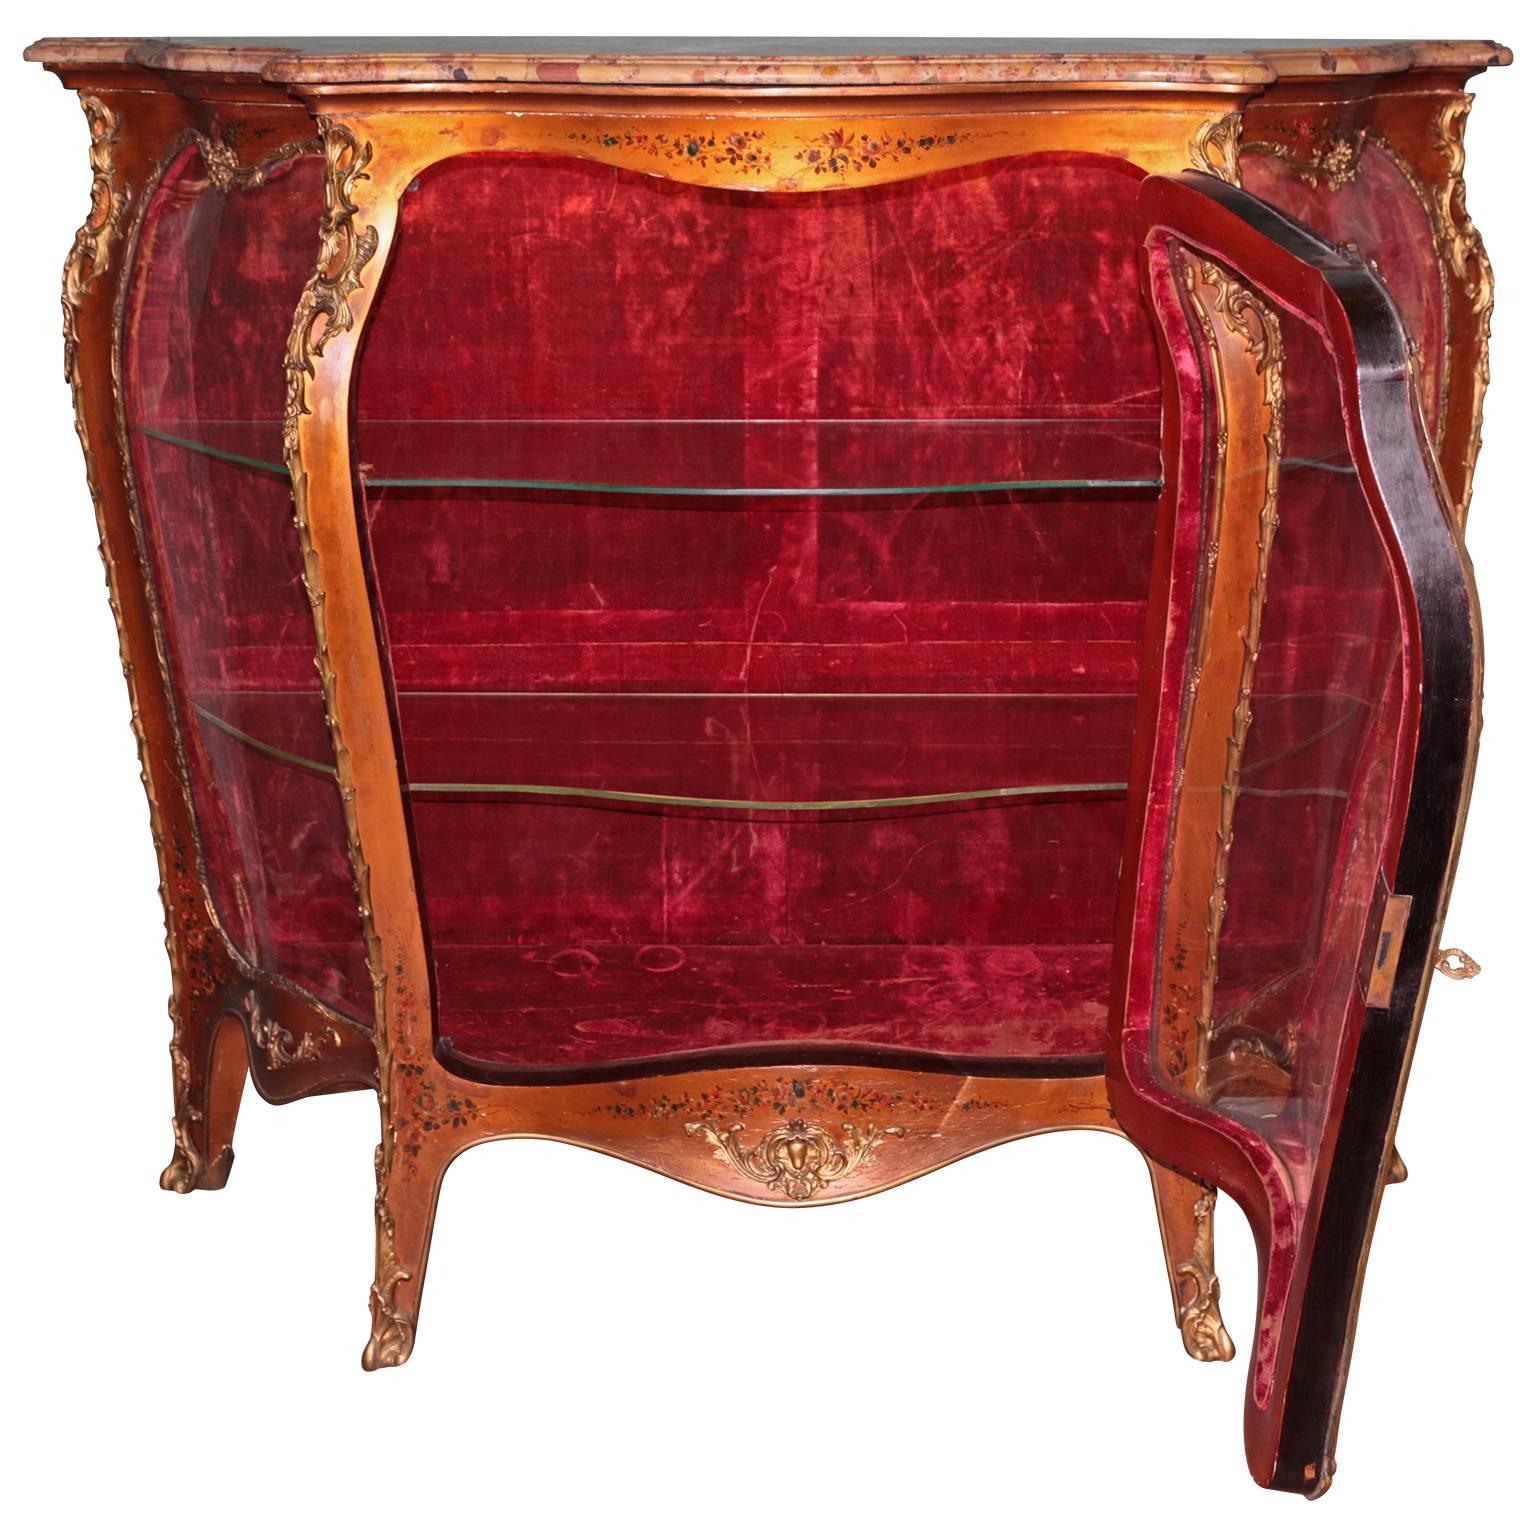 19th century French hand-painted vitrine cabinet with ormolu bronze. Breche marble-top with serpentine shape glass doors. The central door locking mechanism is all original and untouched. The door opens to an interior with two glass shelves with a